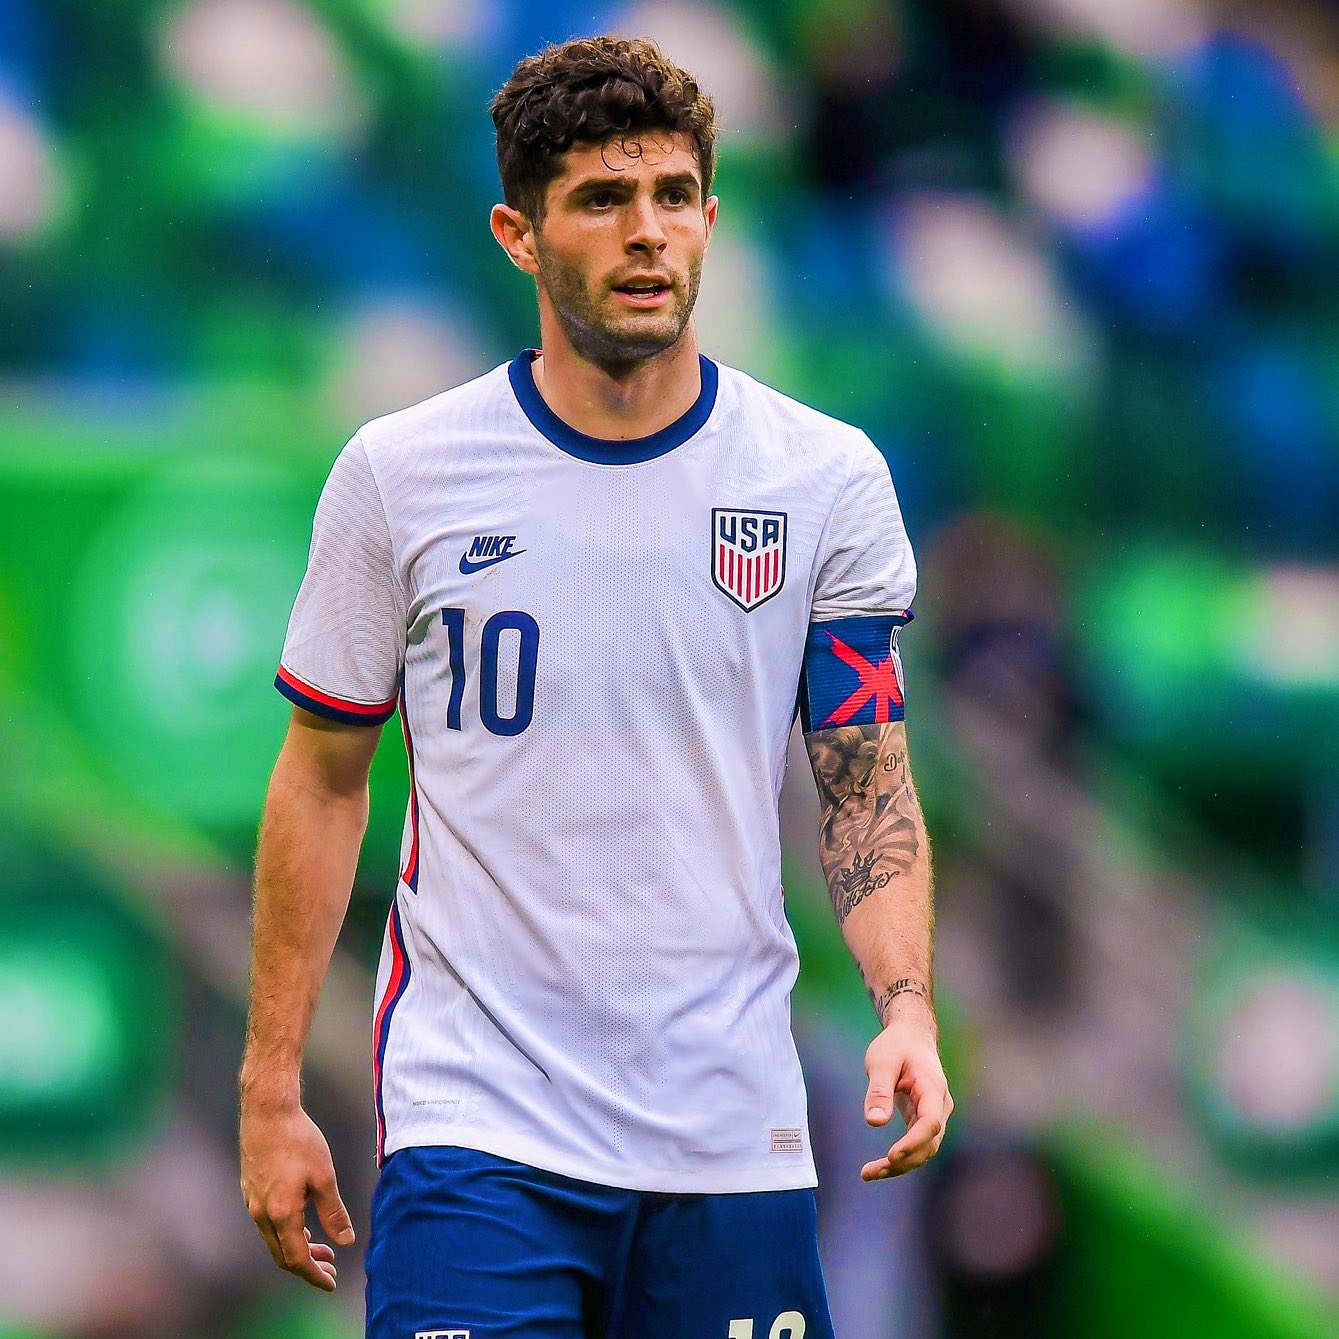 USA coach says Christian Pulisic is "an unbelievable player" but wants